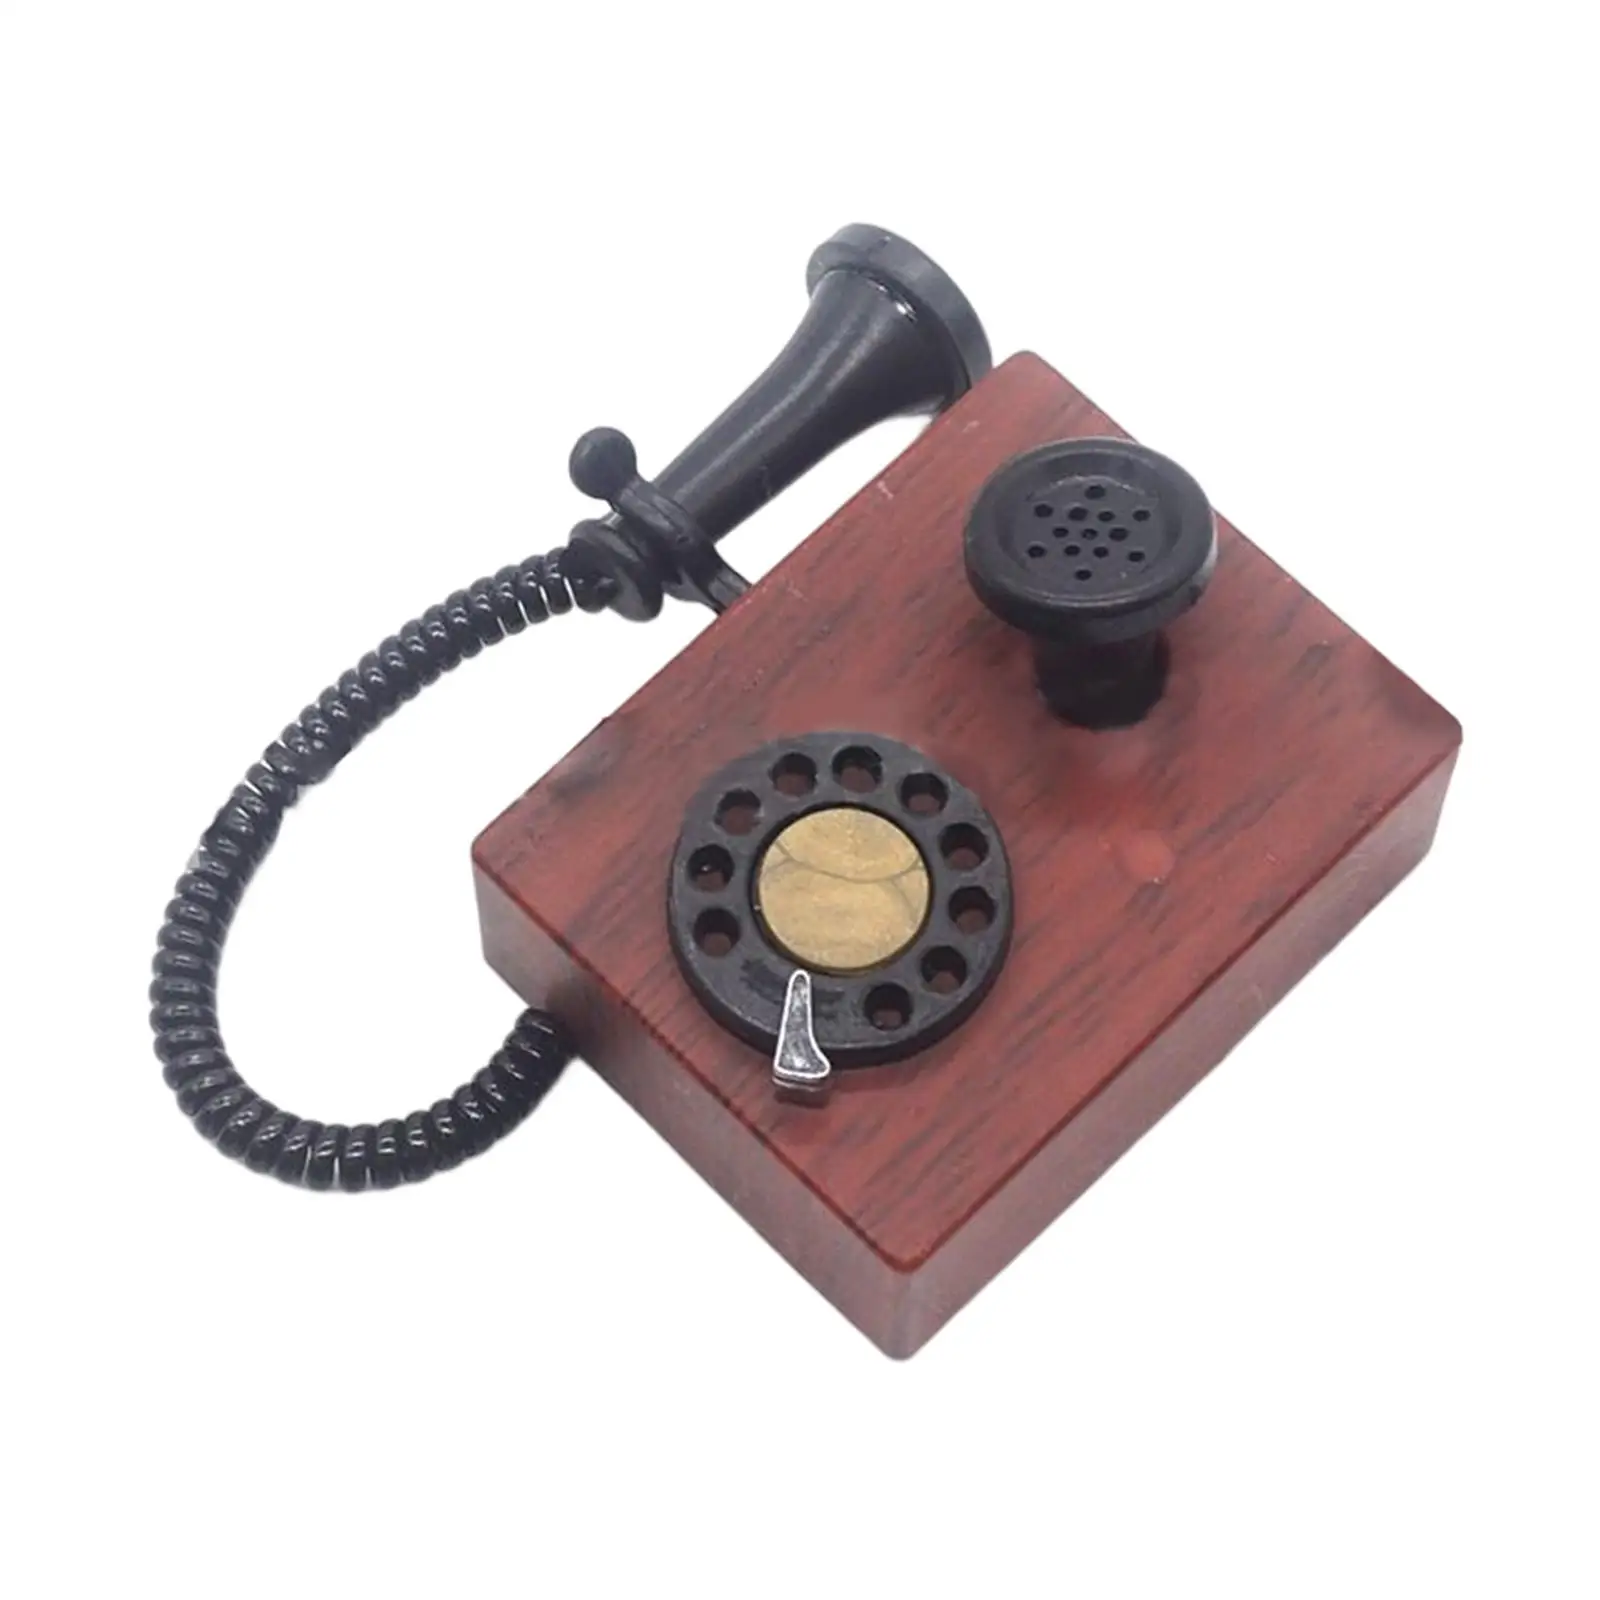 

1/12 Model Phone Doll House Accessories DIY Accs Simulated Fixed Telephone for Handcraft Micro Landscape Life Scene Layout Gift